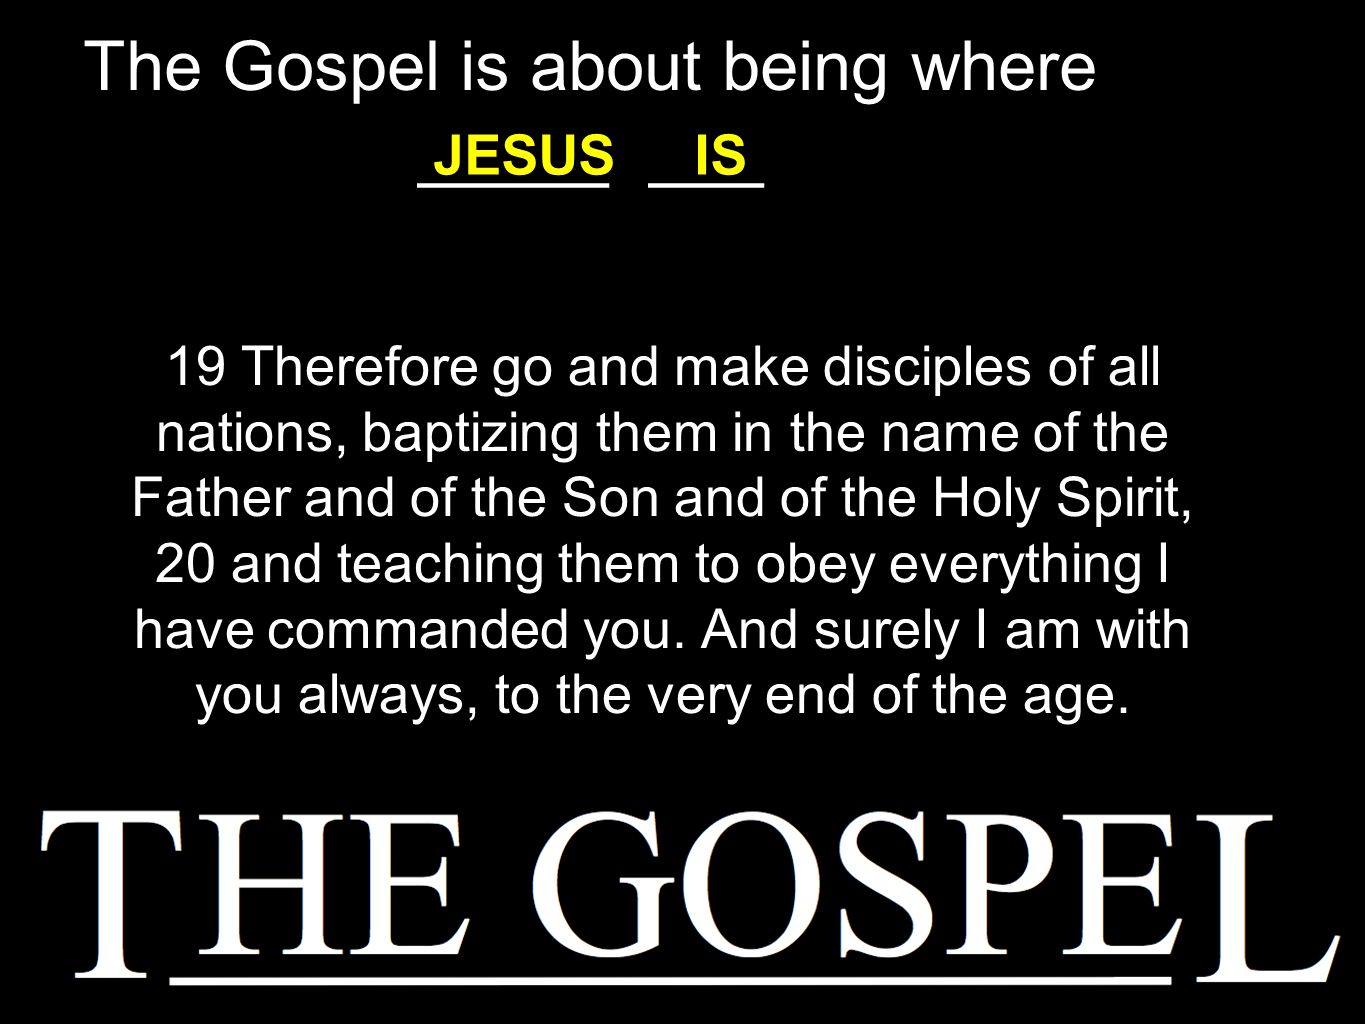 19 Therefore go and make disciples of all nations, baptizing them in the name of the Father and of the Son and of the Holy Spirit, 20 and teaching them to obey everything I have commanded you.